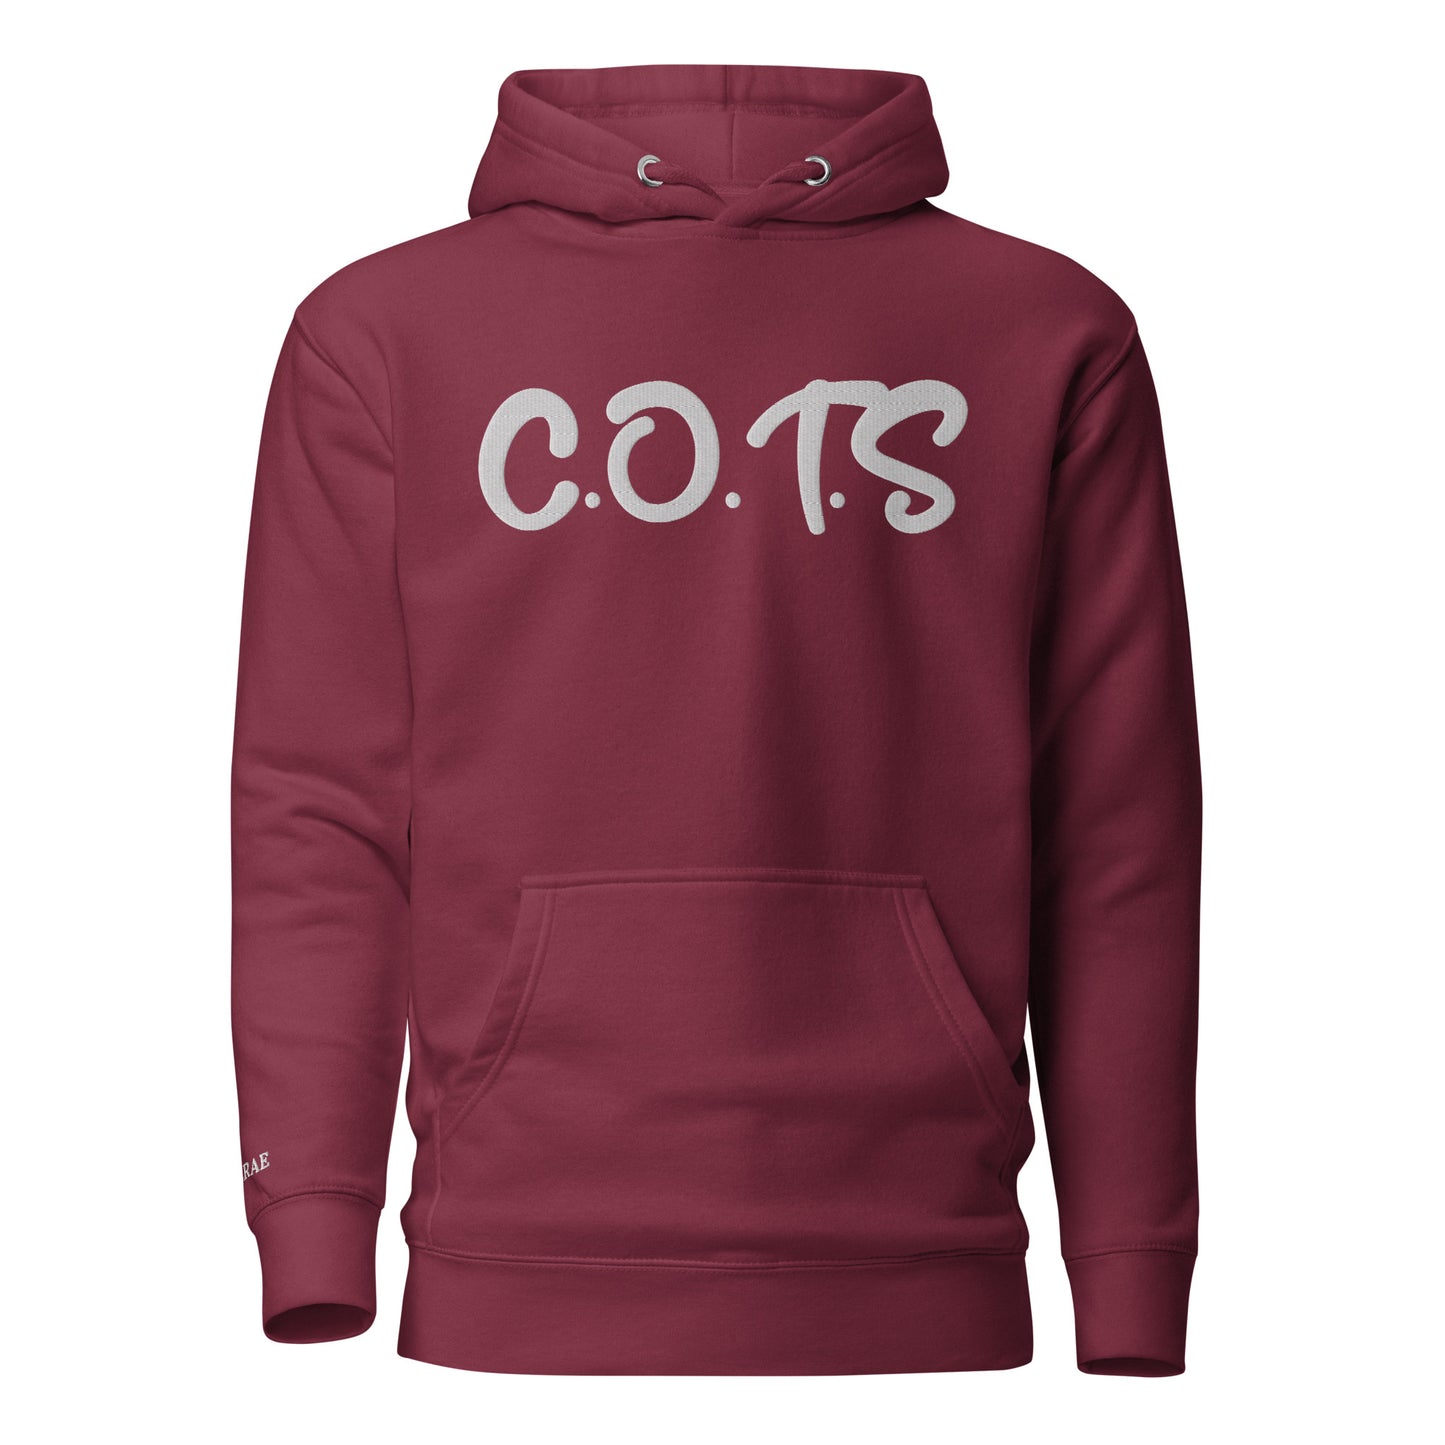 C.O.T.S Stitched Unisex Hoodie